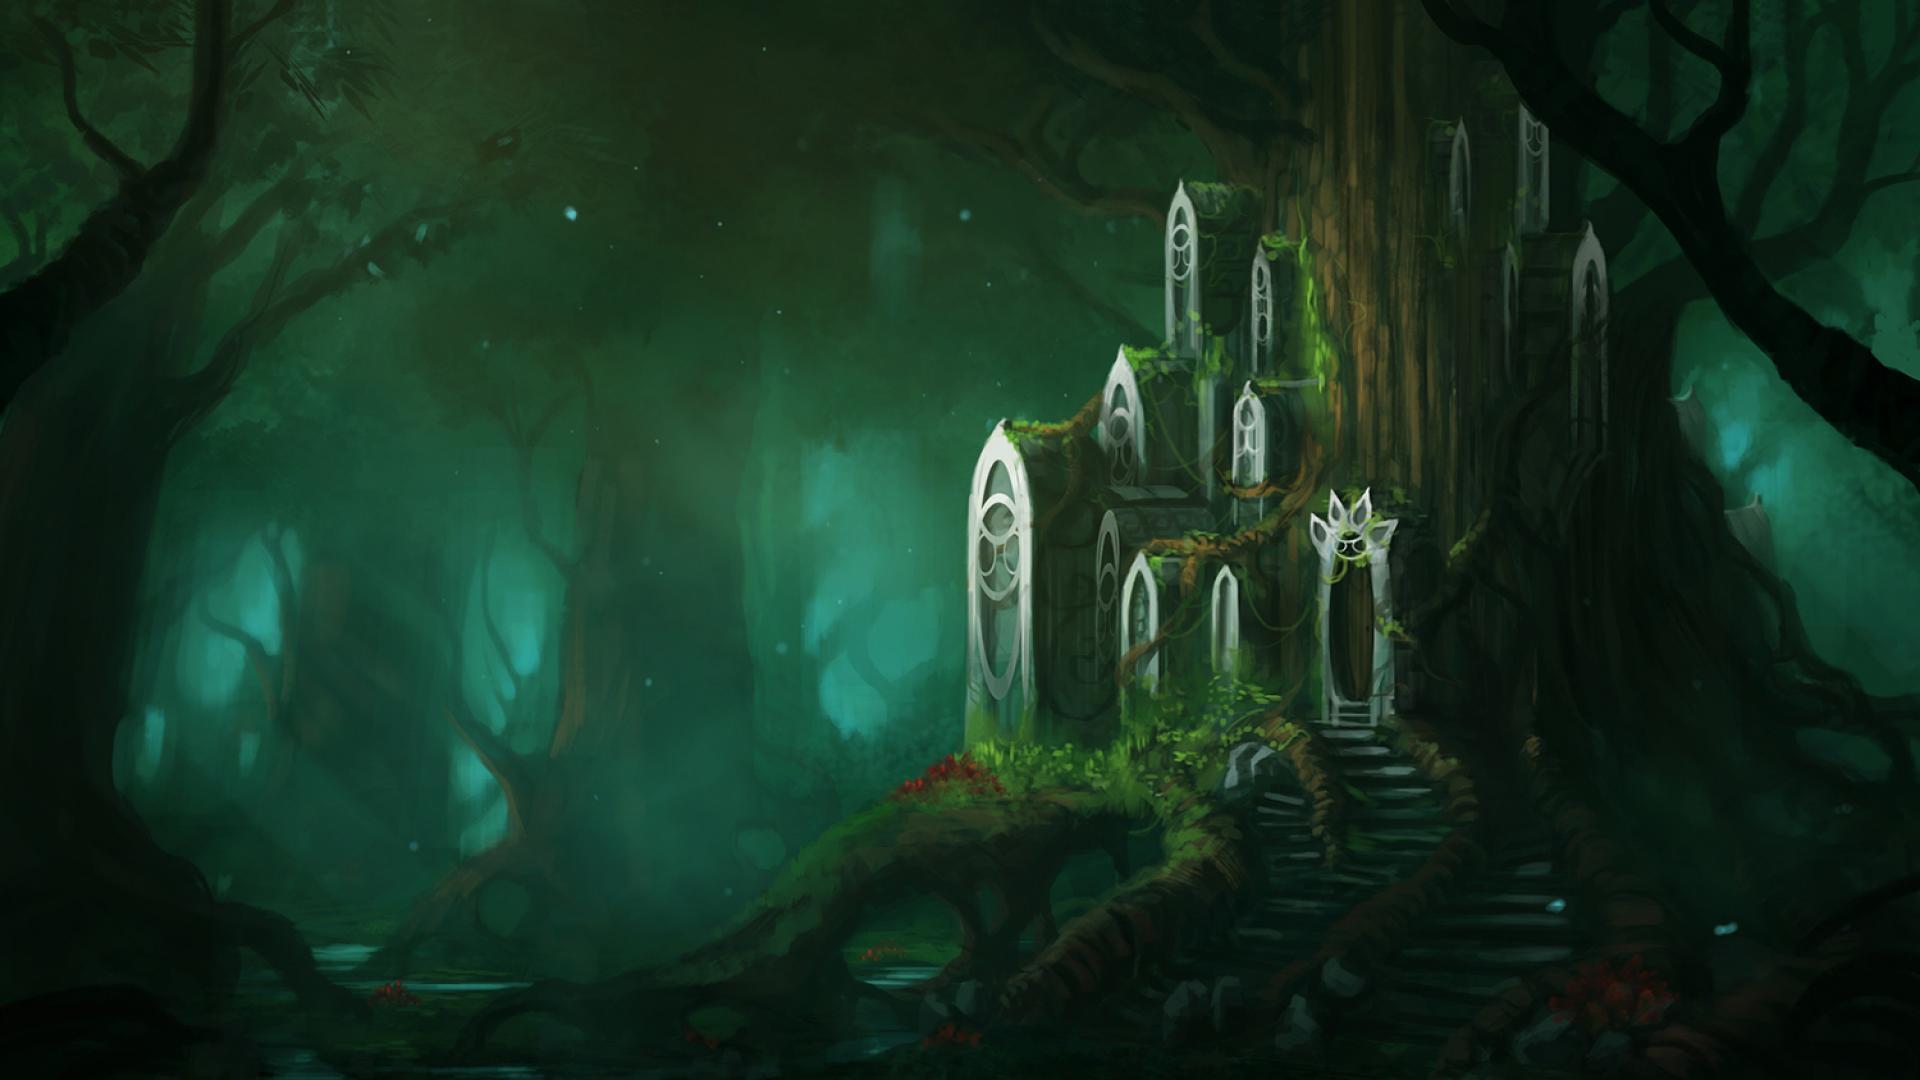 Fantasy Forest Wallpapers Wallpaper Cave